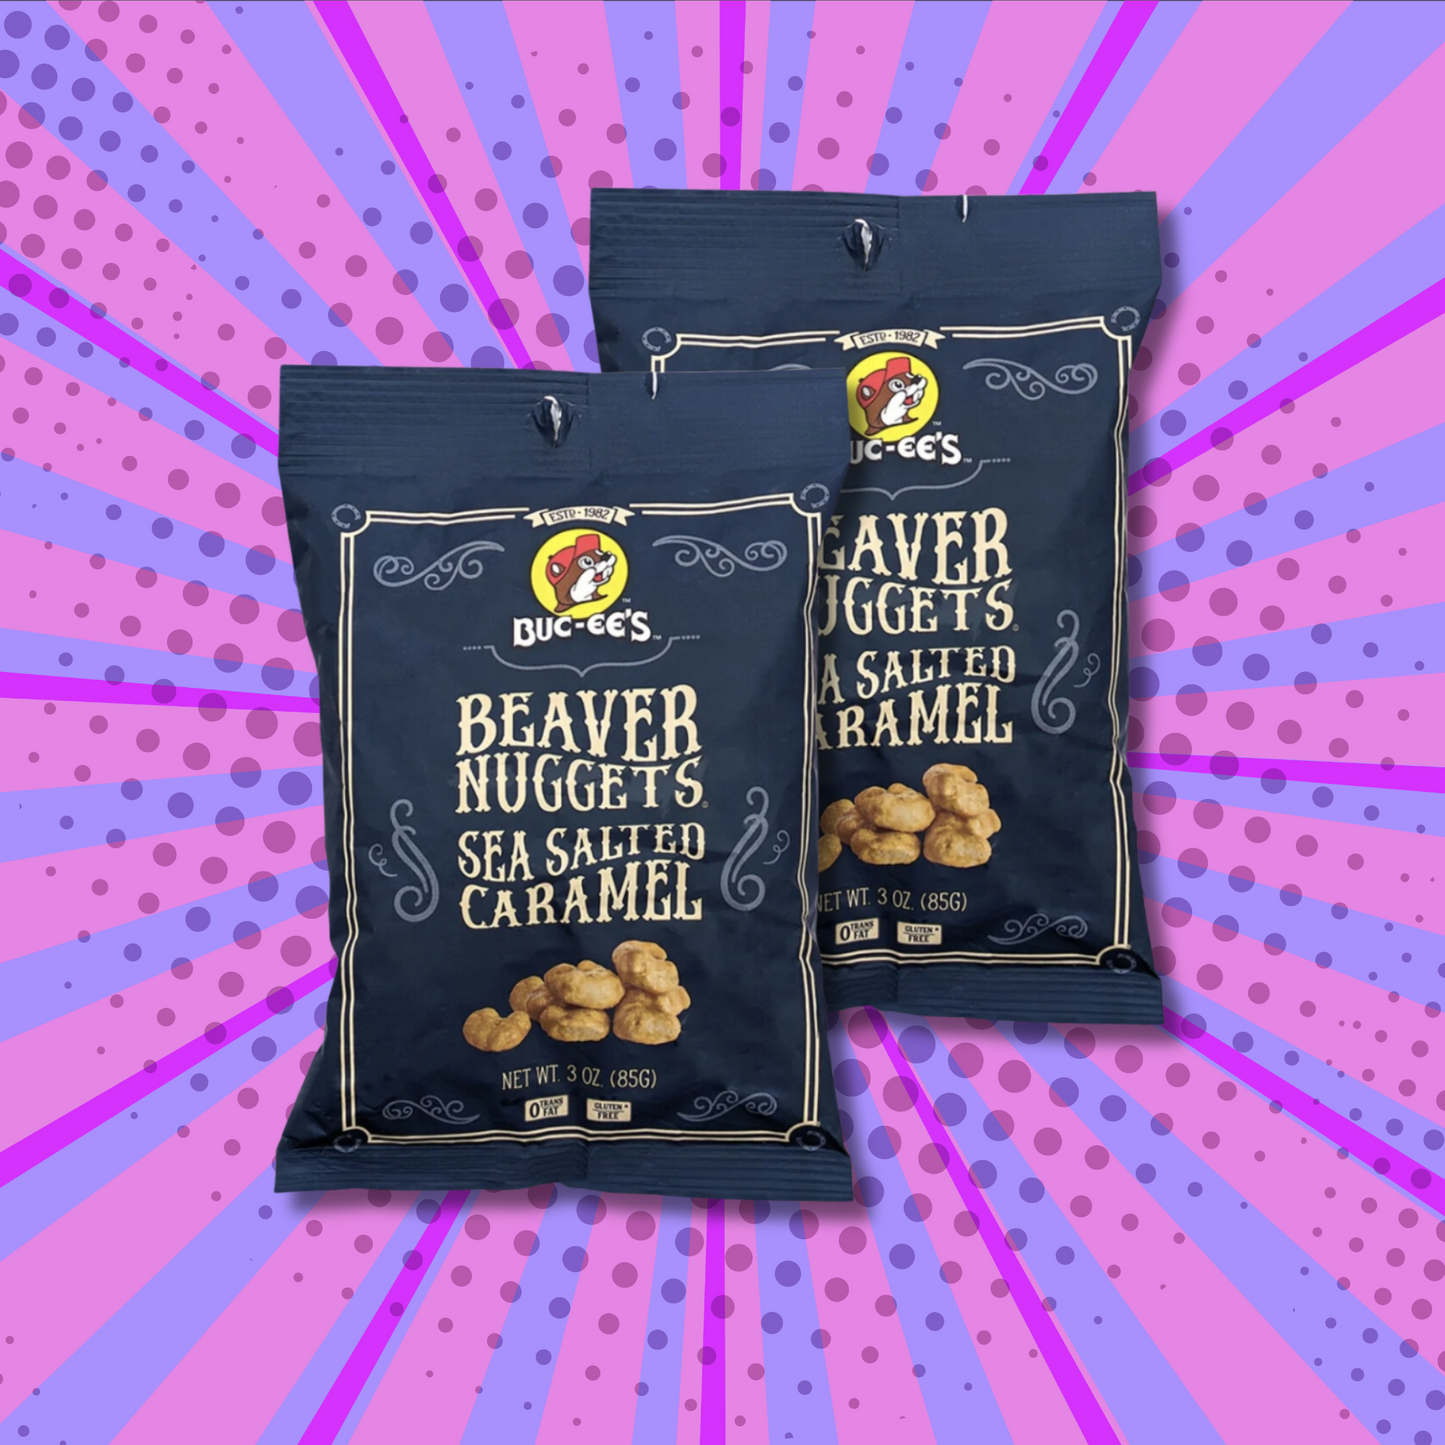 Buc-ee's Sea Salted Caramel Beaver Nuggets 3 oz size (2 Bags)